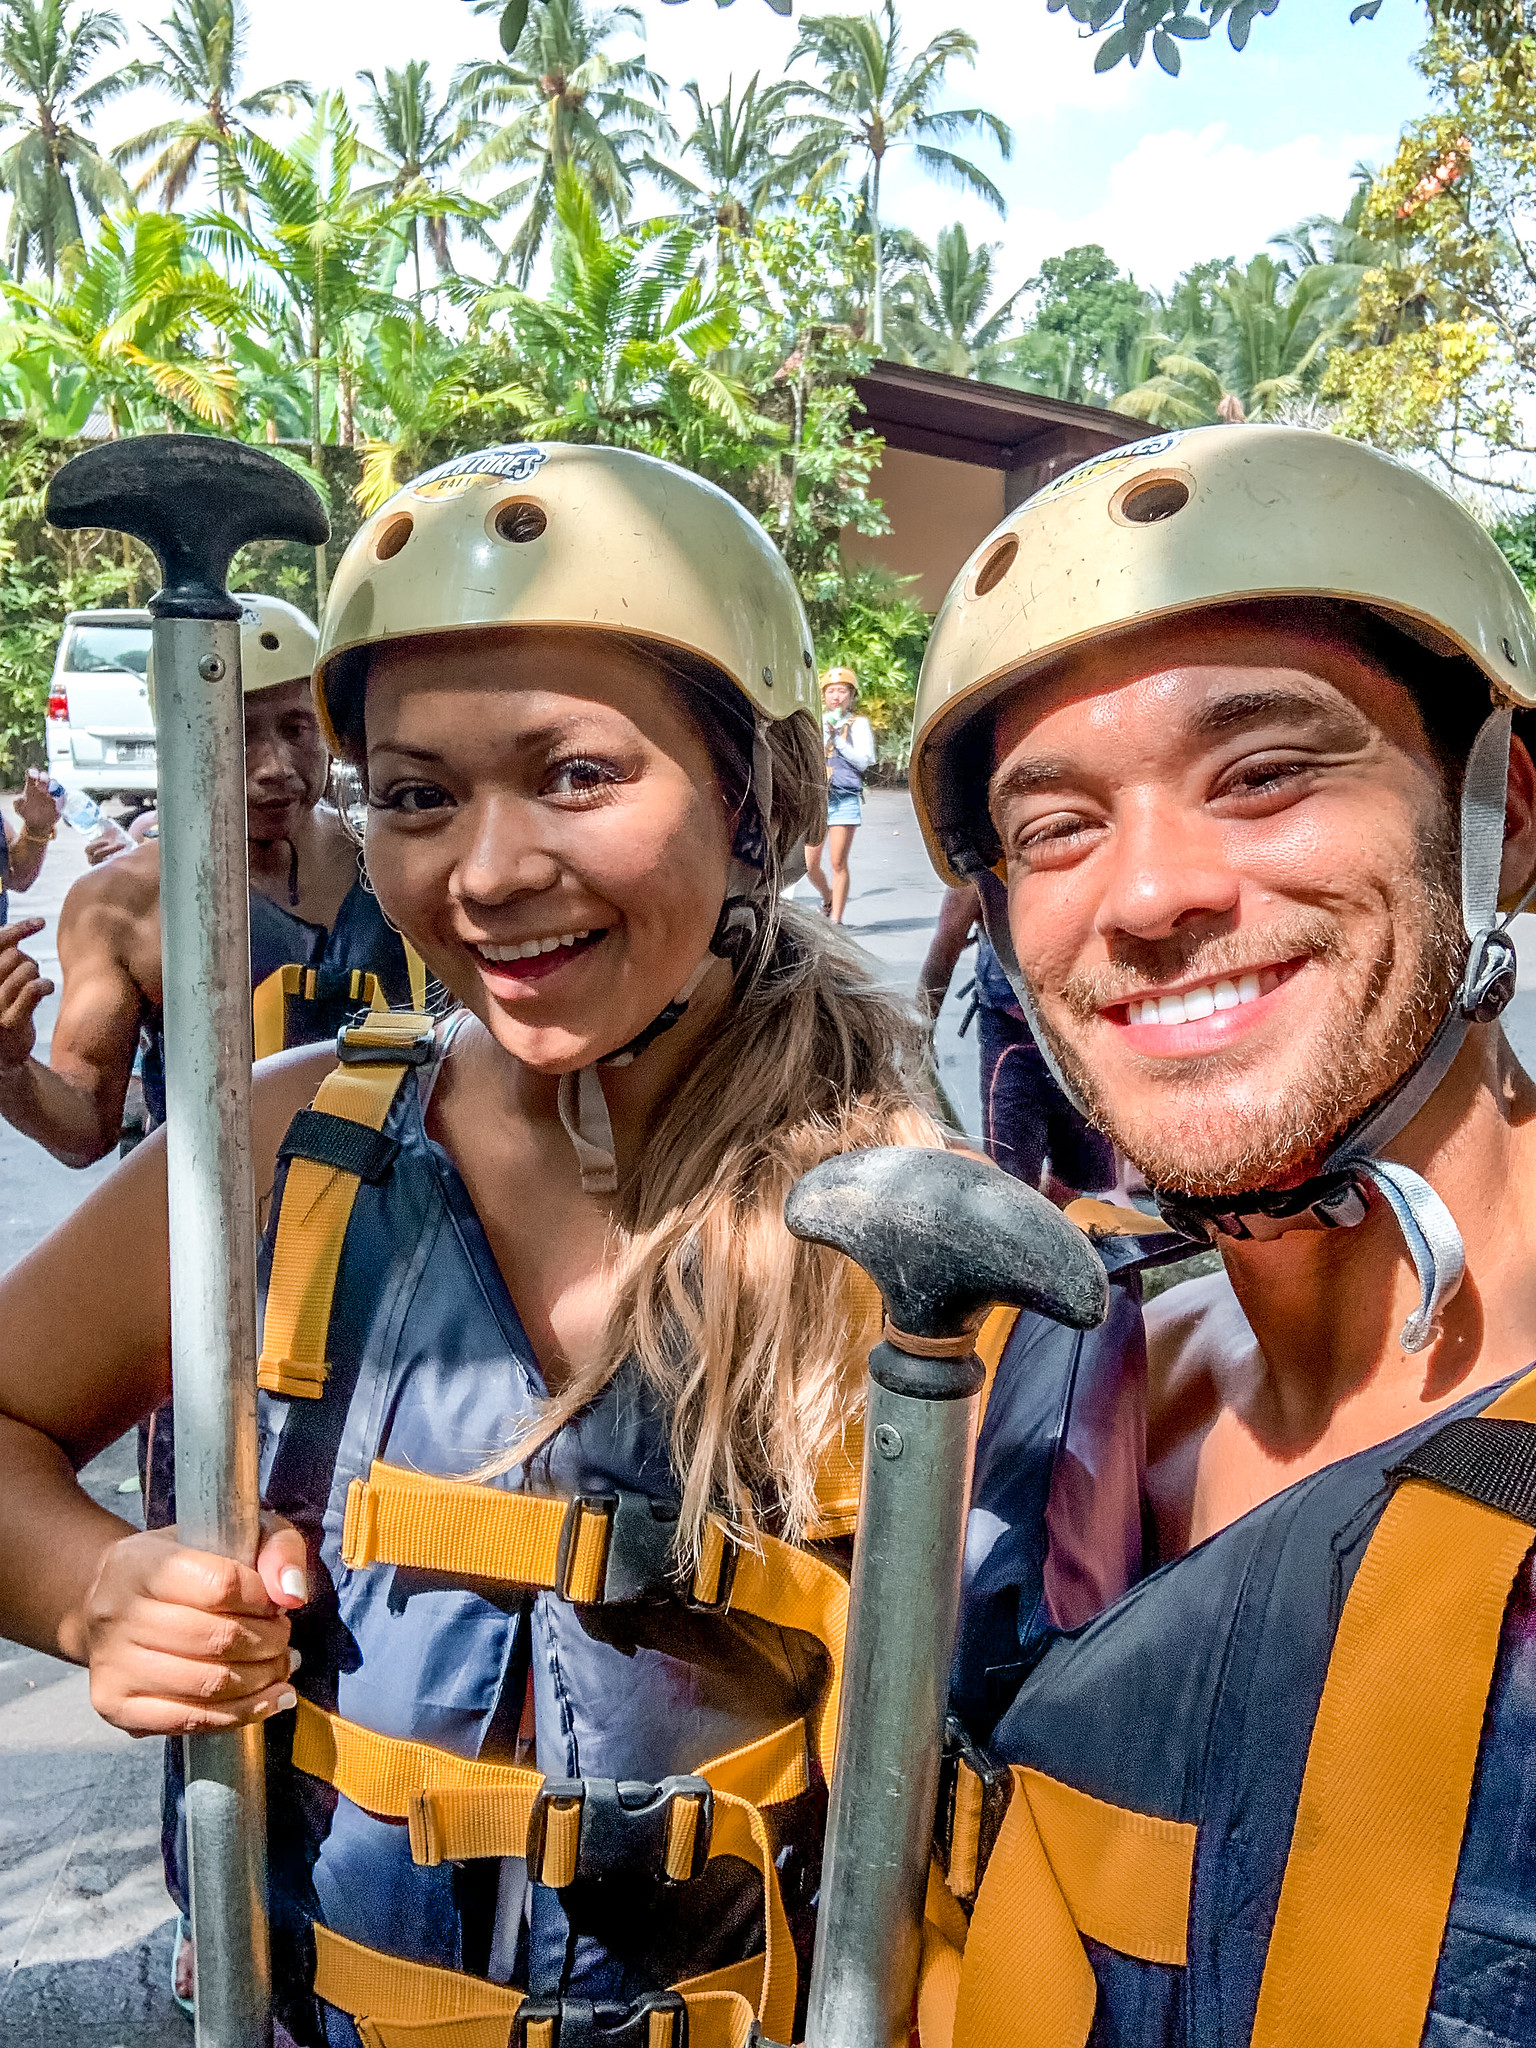 WHITE WATER RAFTING IN BALI WITH MASON ADVENTURES - Things to do Bail, Mason Adventures, Mason Adventures activities, bali travel, bali things to do, white water rafting ubud, white water rafting bali, white water rafting, bali activities, bali adventures | Wanderlustyle.com